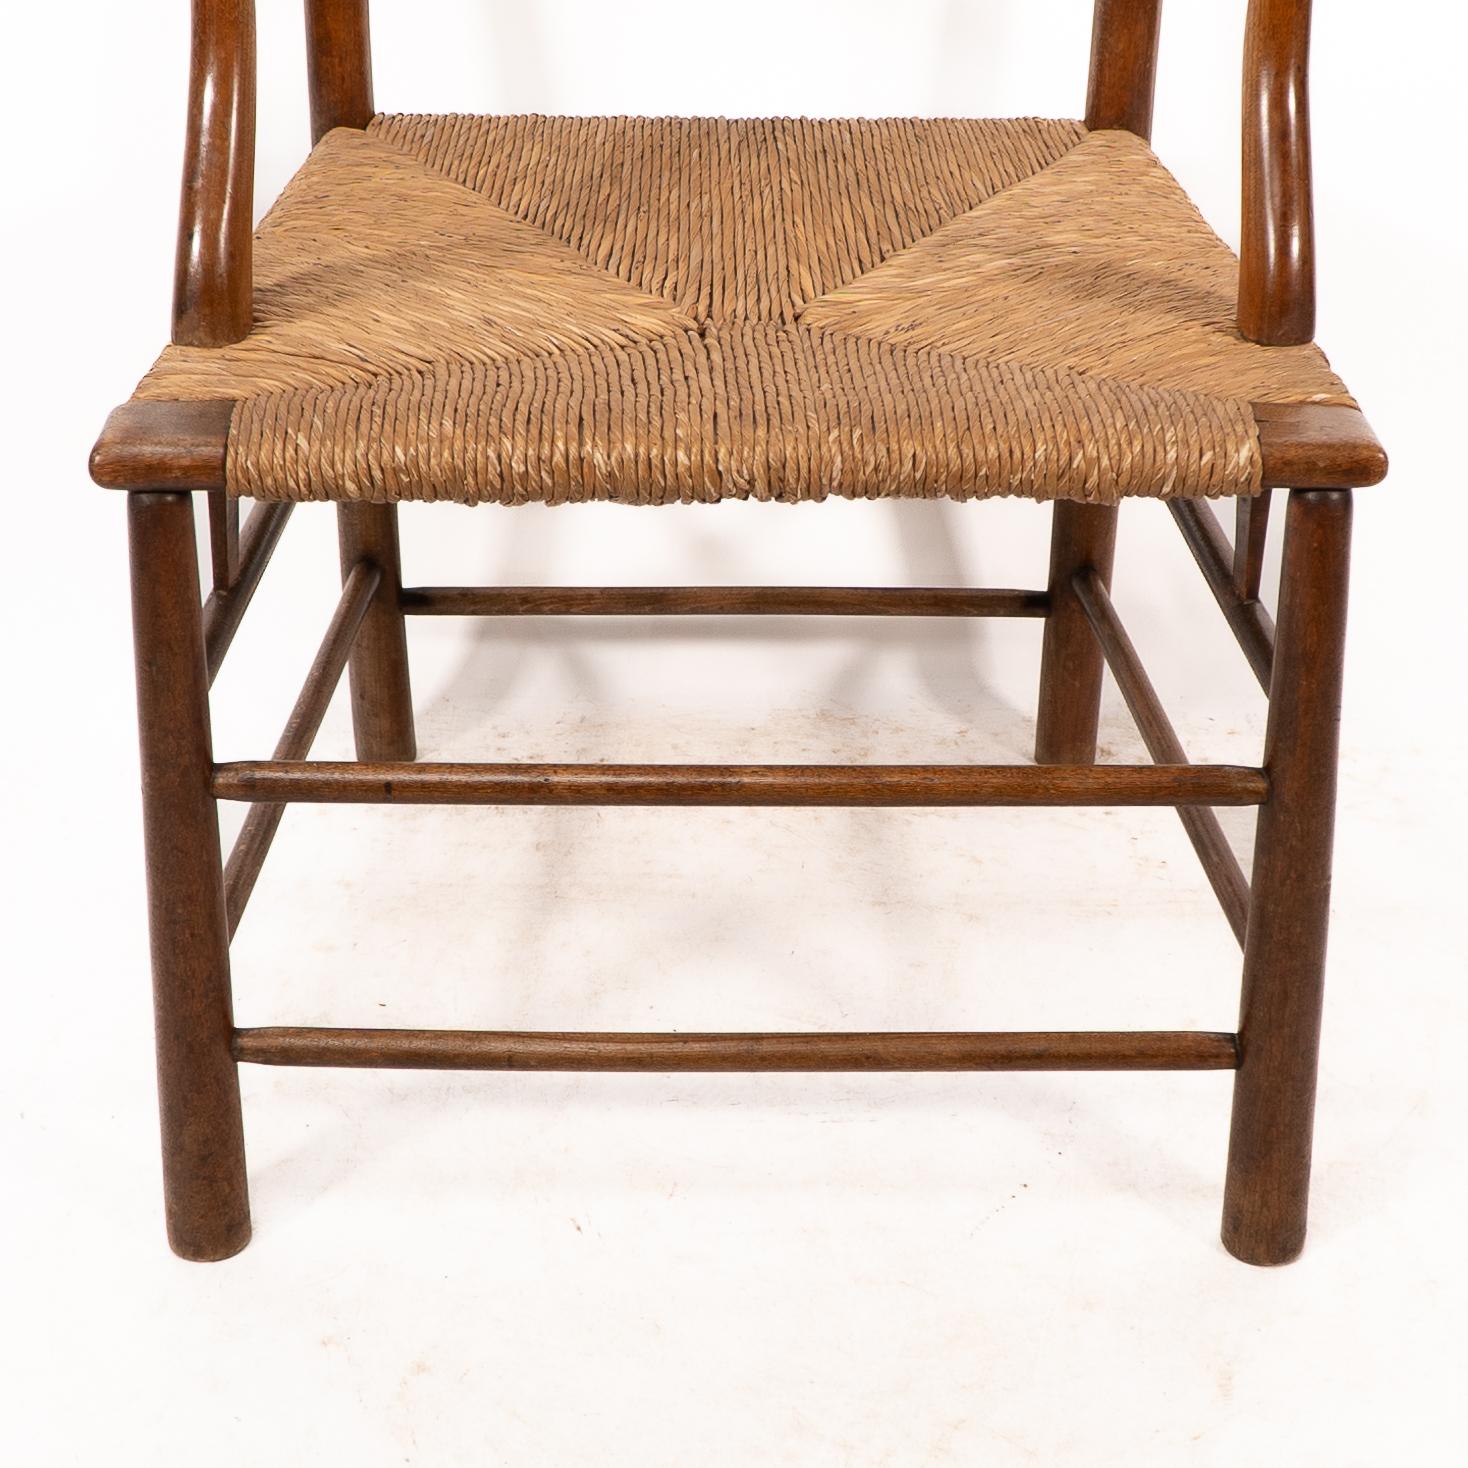 C R Ashbee. An Arts and Crafts rush seat ladder back armchair For Sale 1